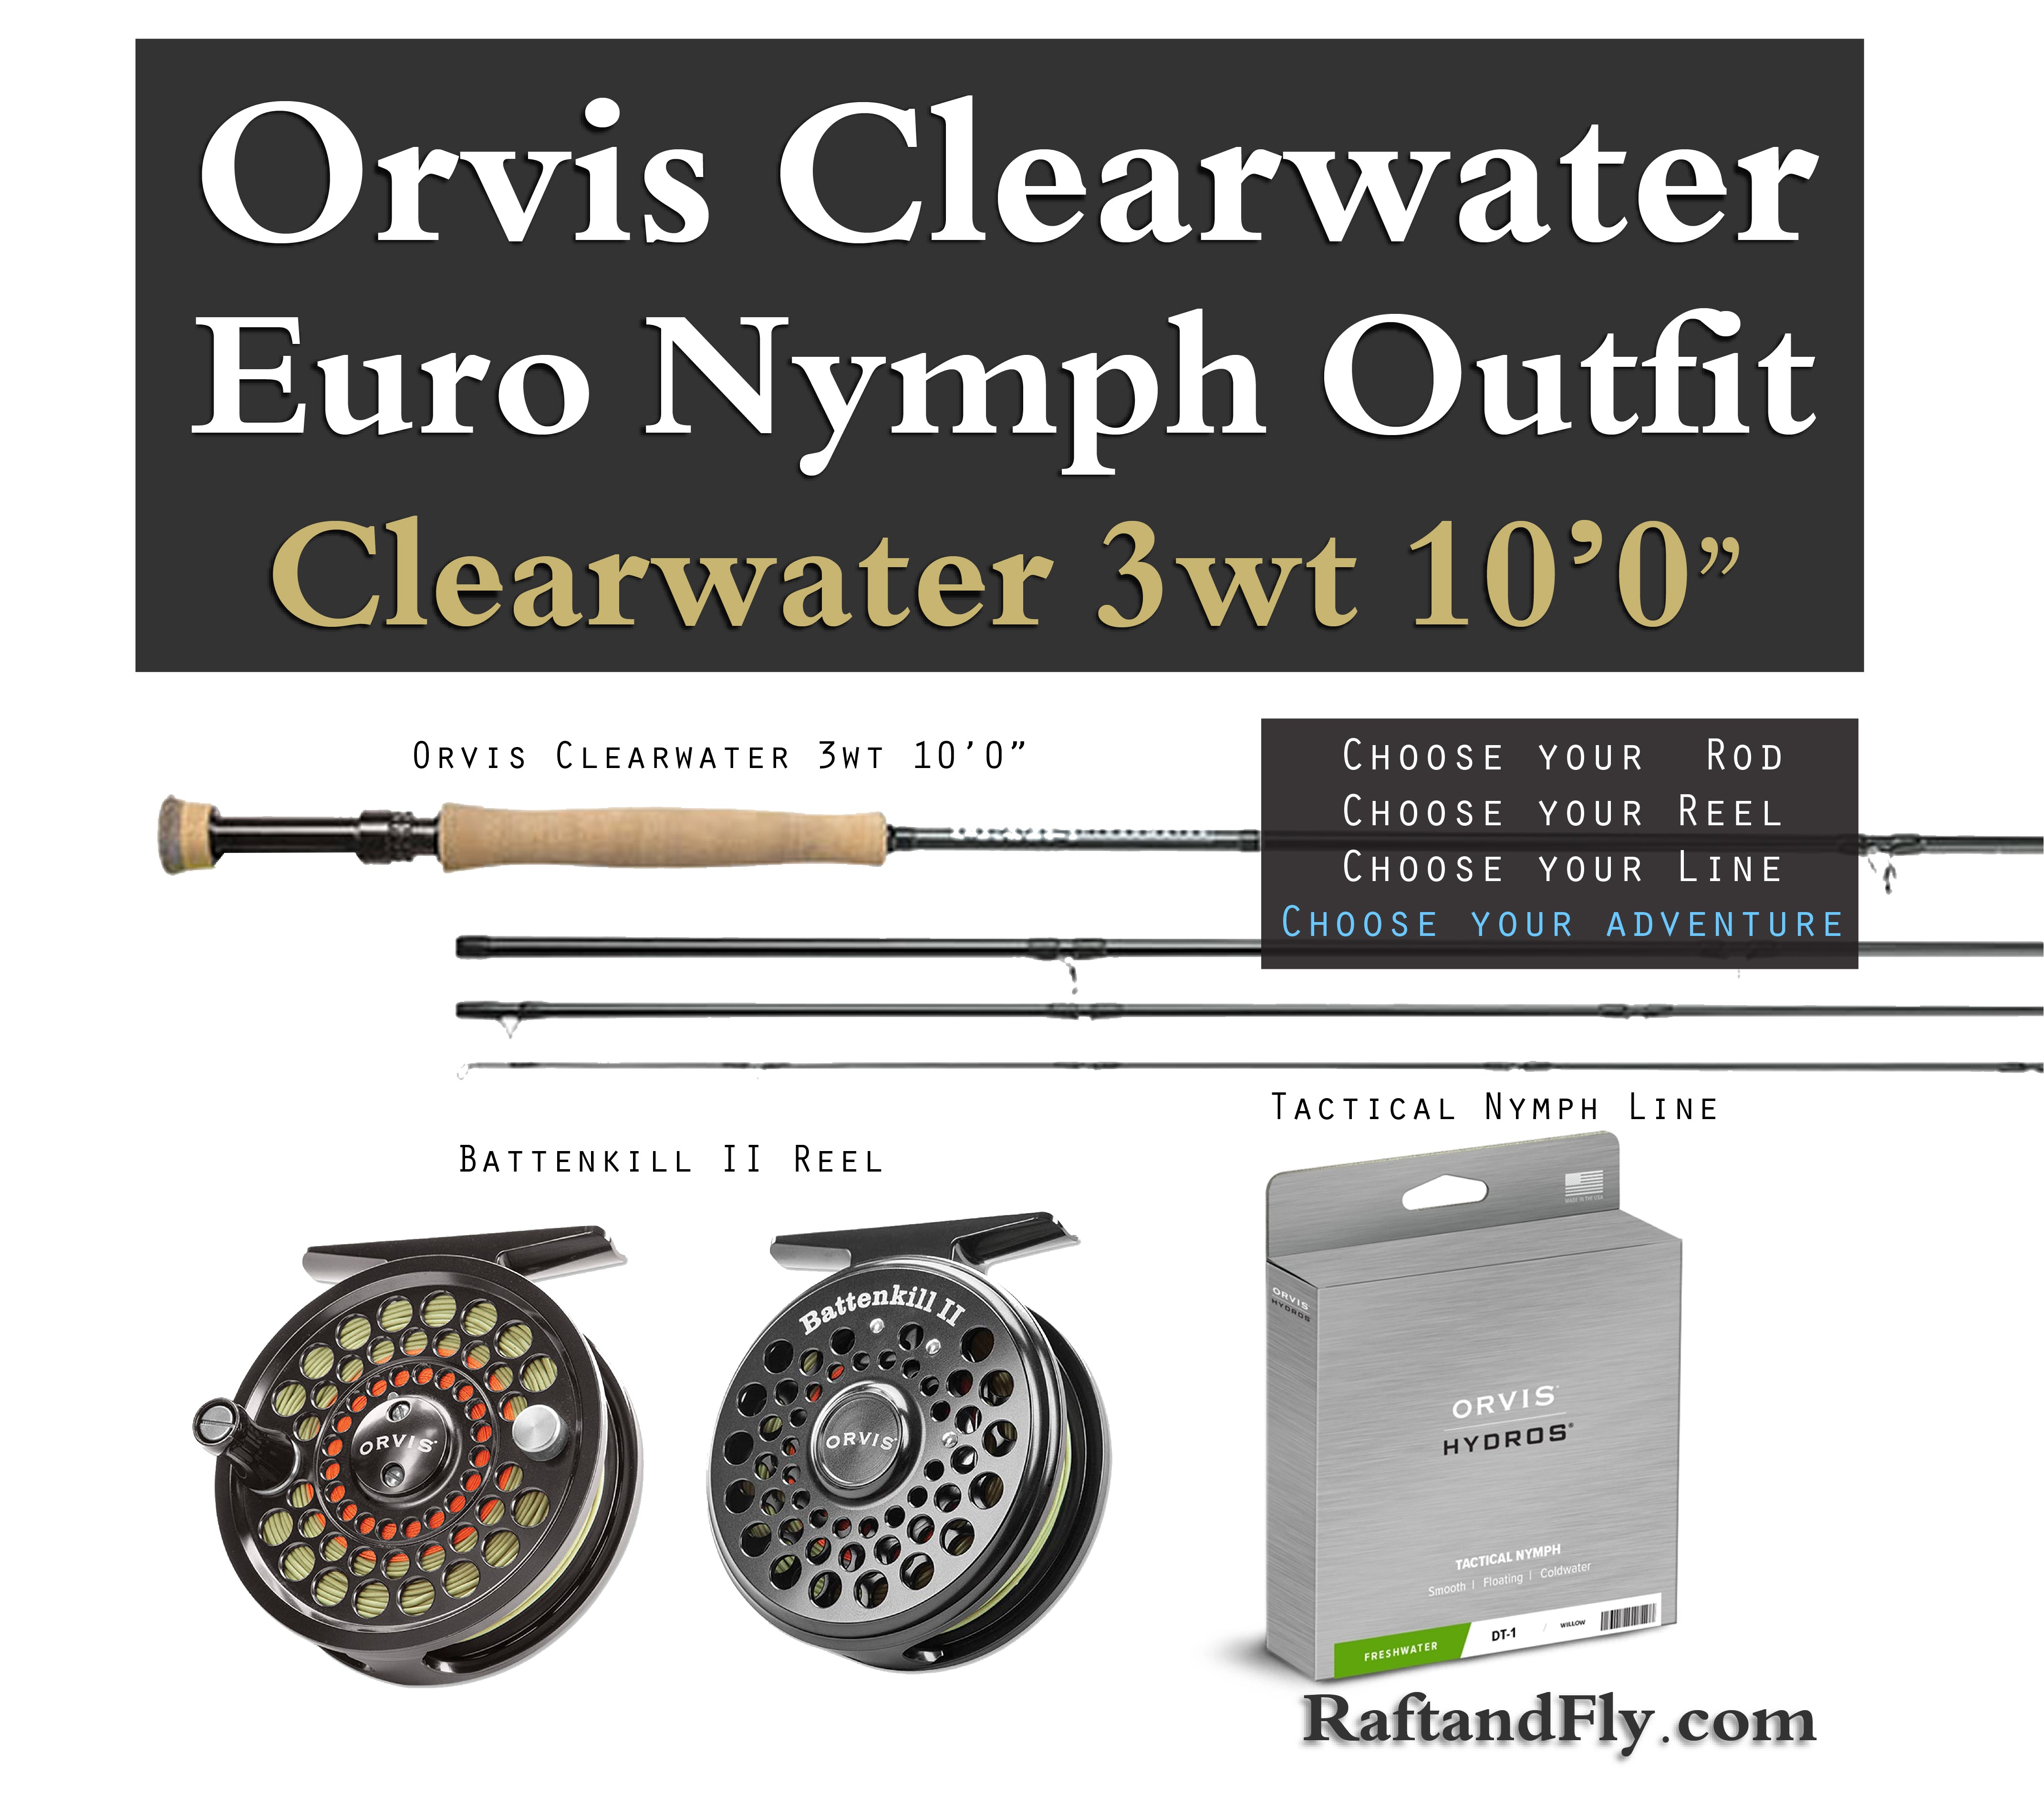 Orvis Clearwater 3wt 10'0 Nymph Outfit Package